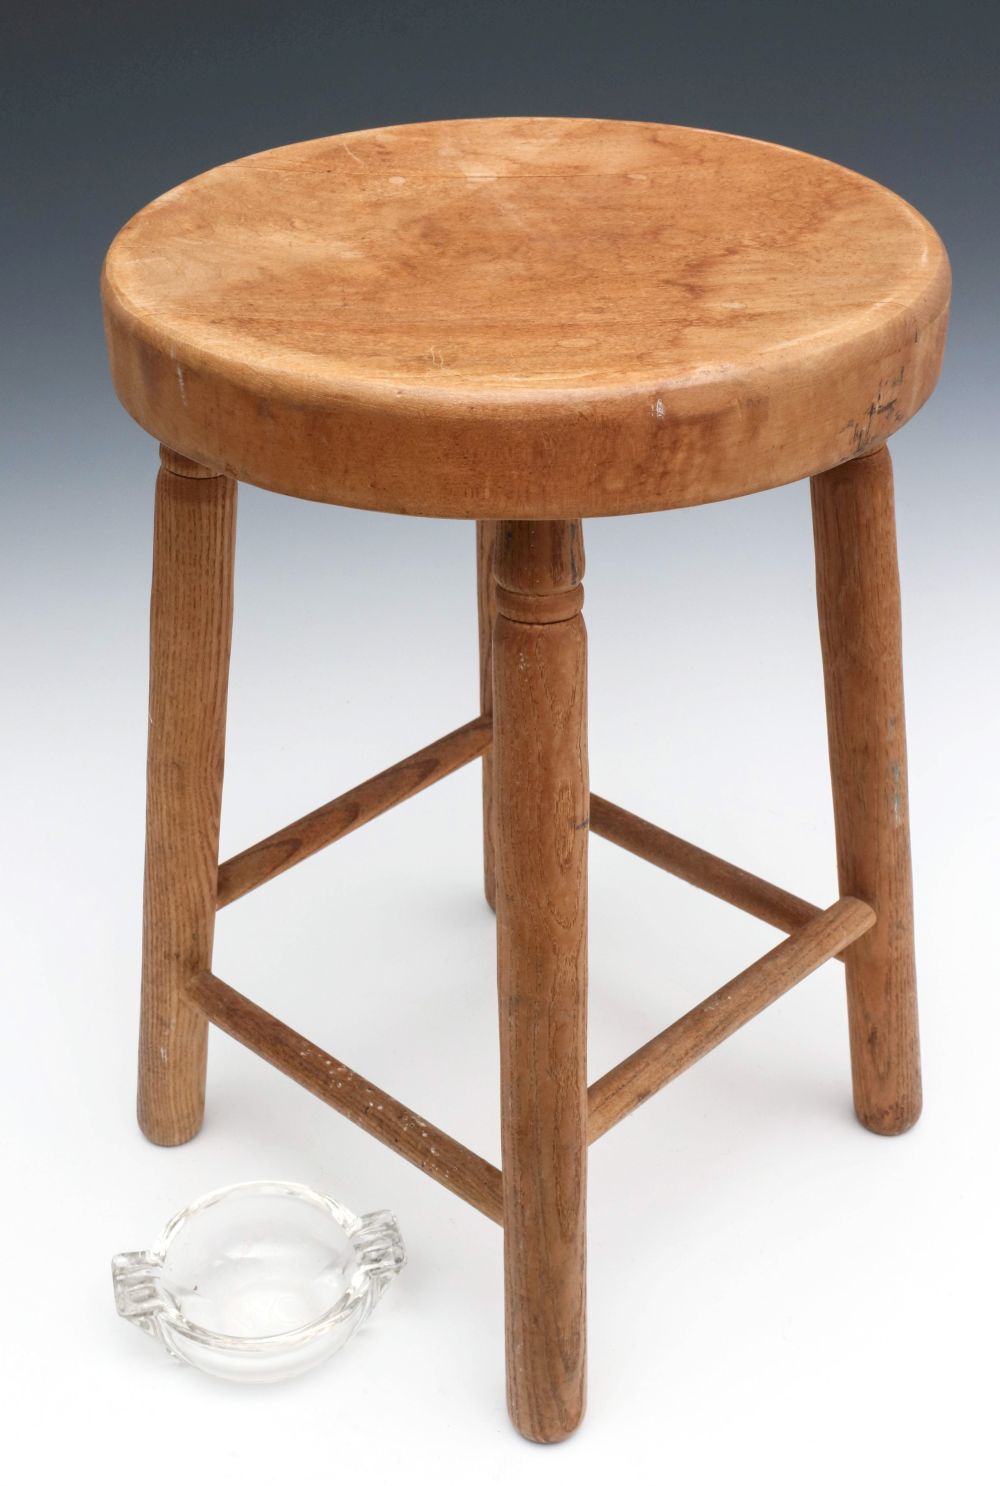 TWO WOOD STOOLS BRANDED NYC AND CHGO...RR